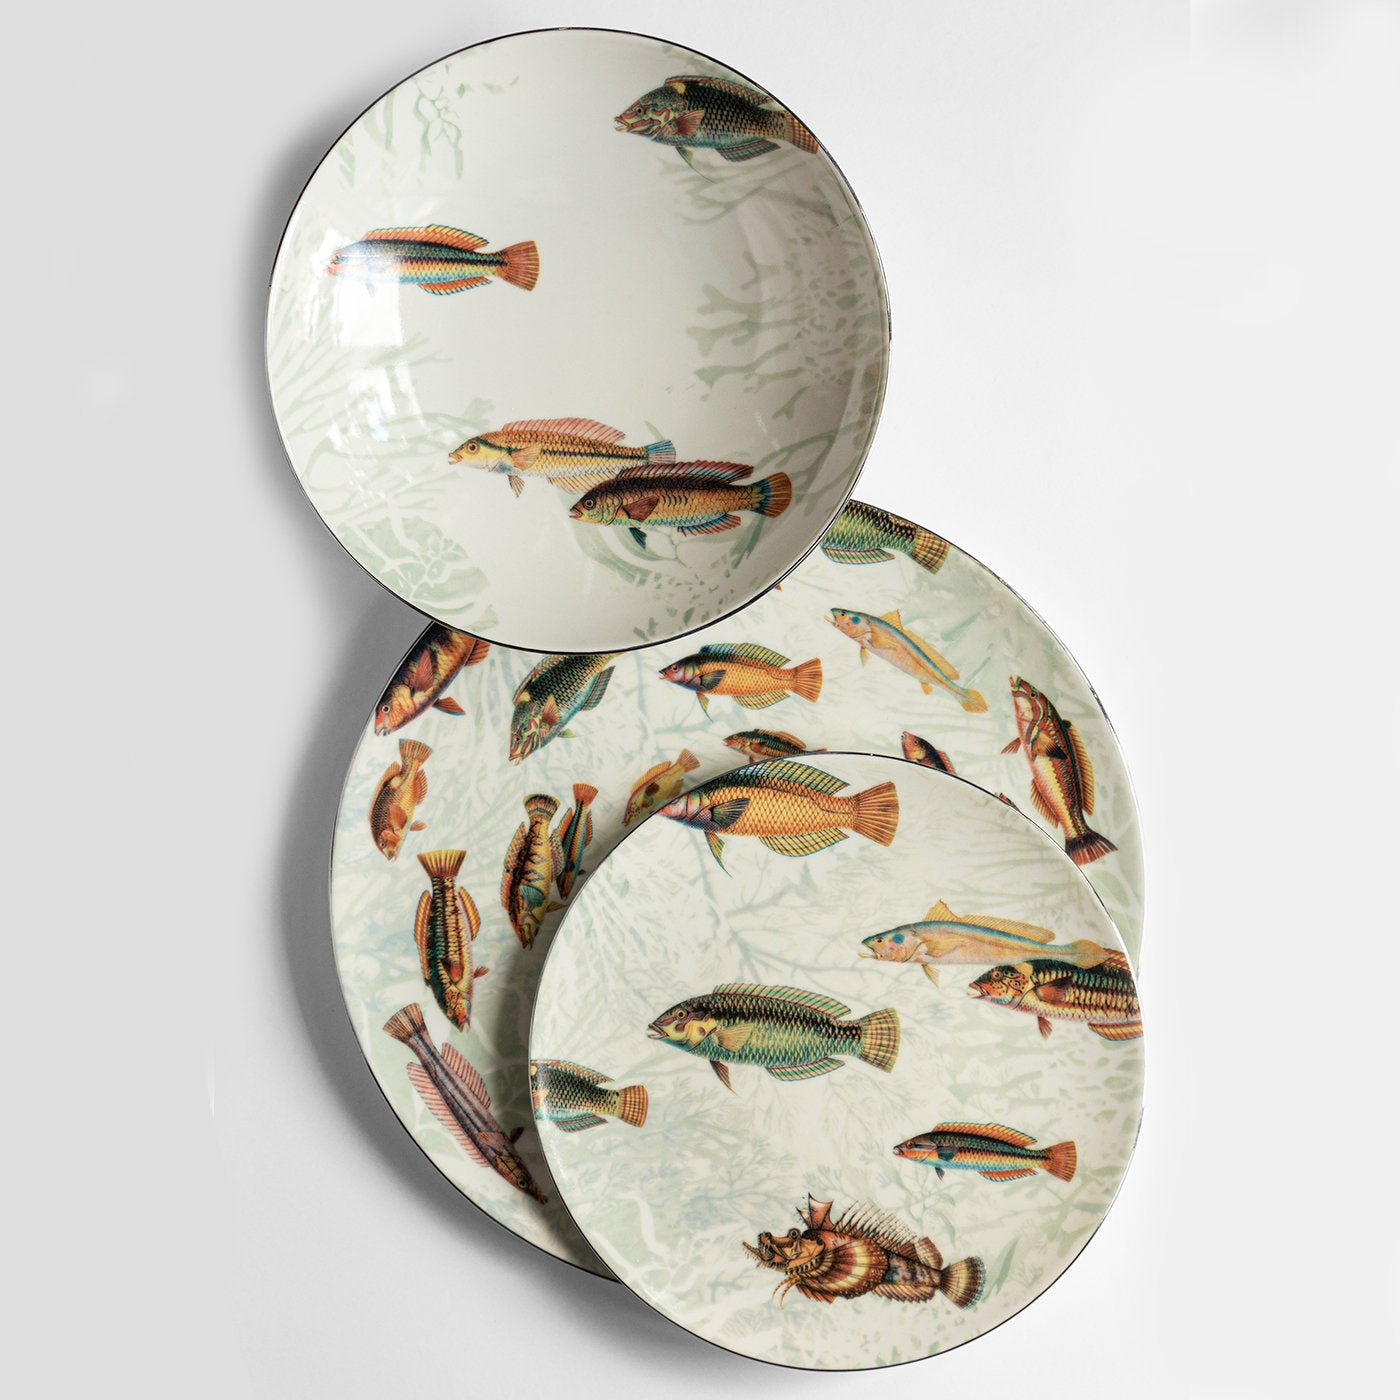 Amami Porcelain Soup Plate With Tropical Fish #5 - Alternative view 1